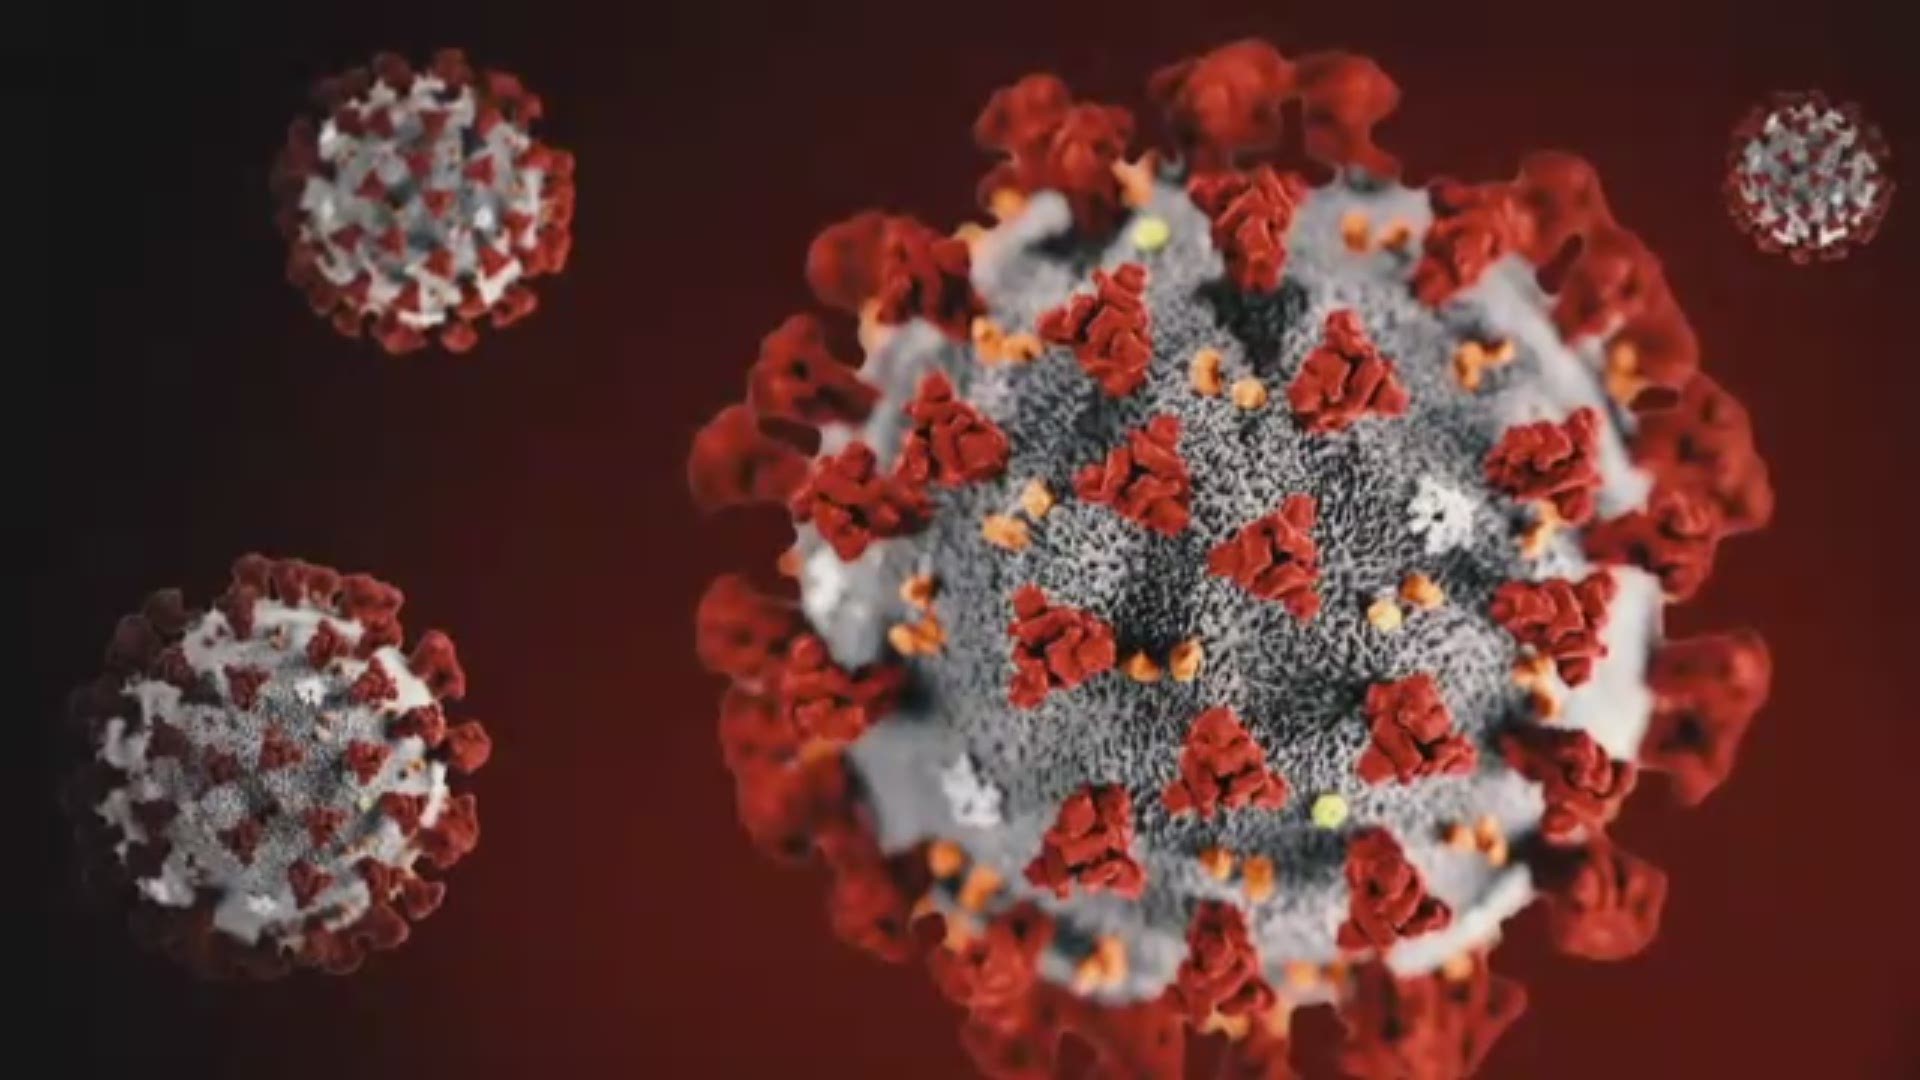 KGW's Pat Dooris explains what a coronavirus test is and how to get one.